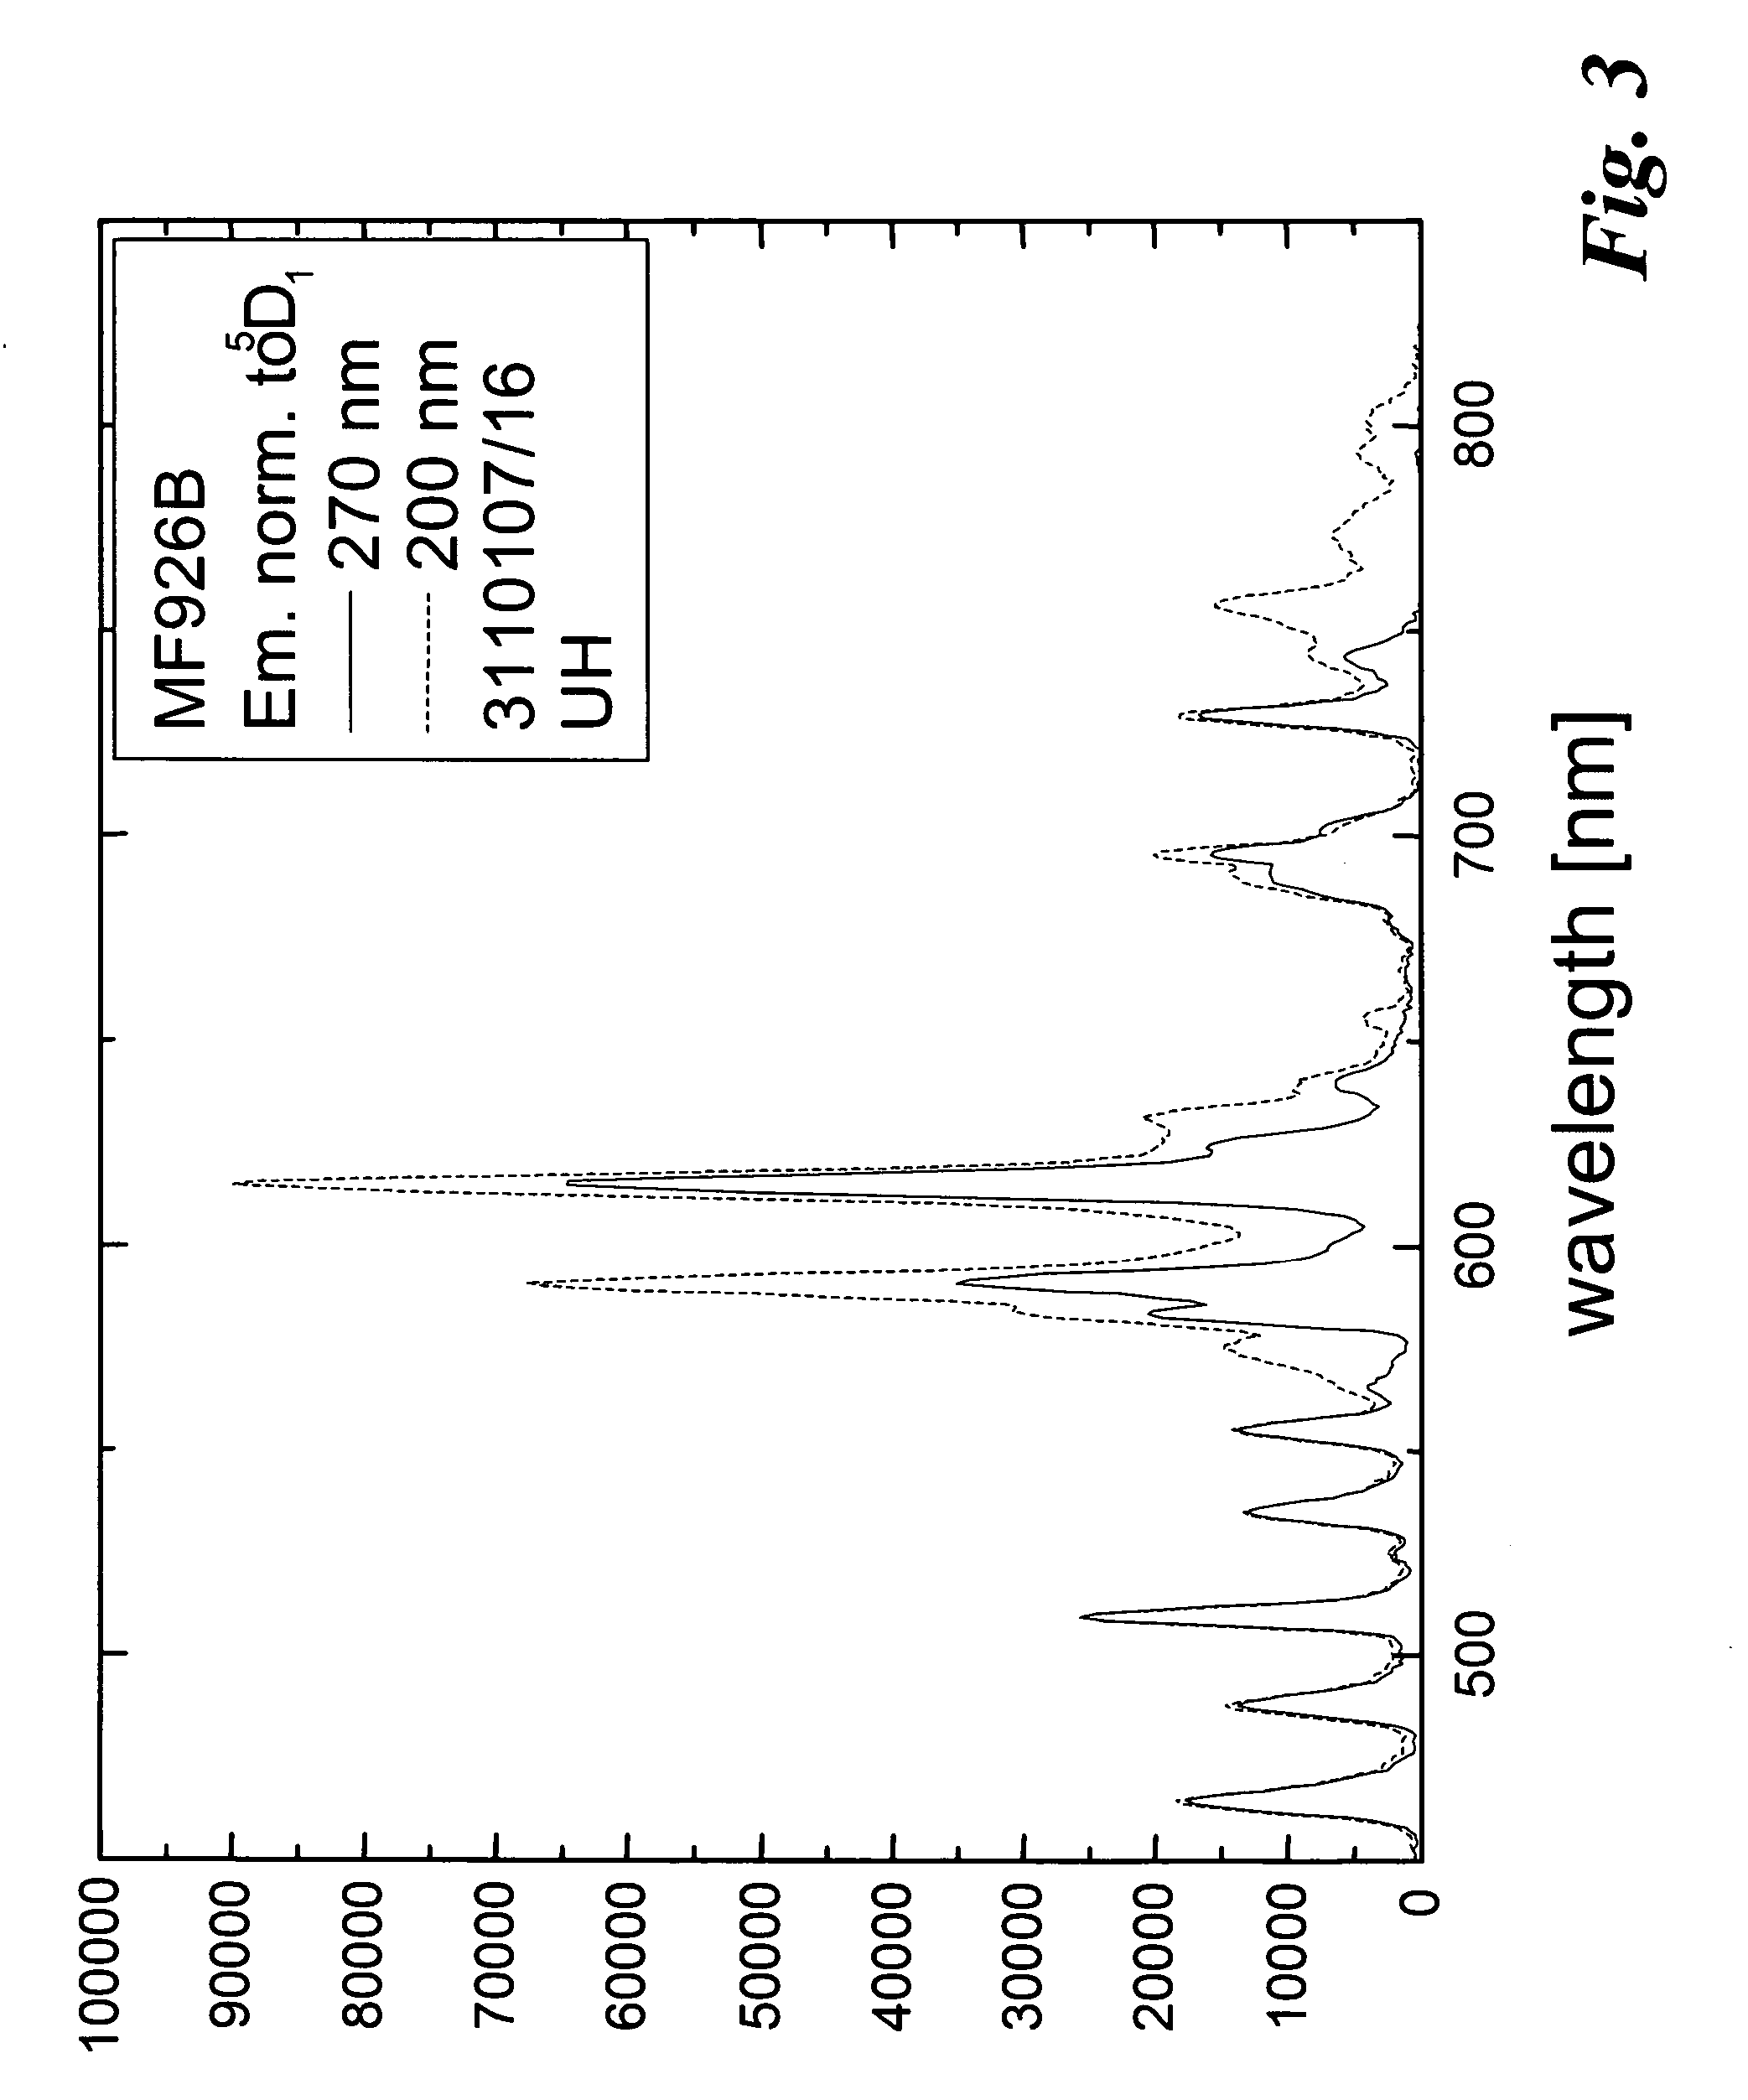 Quantum-splitting fluoride-based phosphors, method of producing, and radiation sources incorporating same